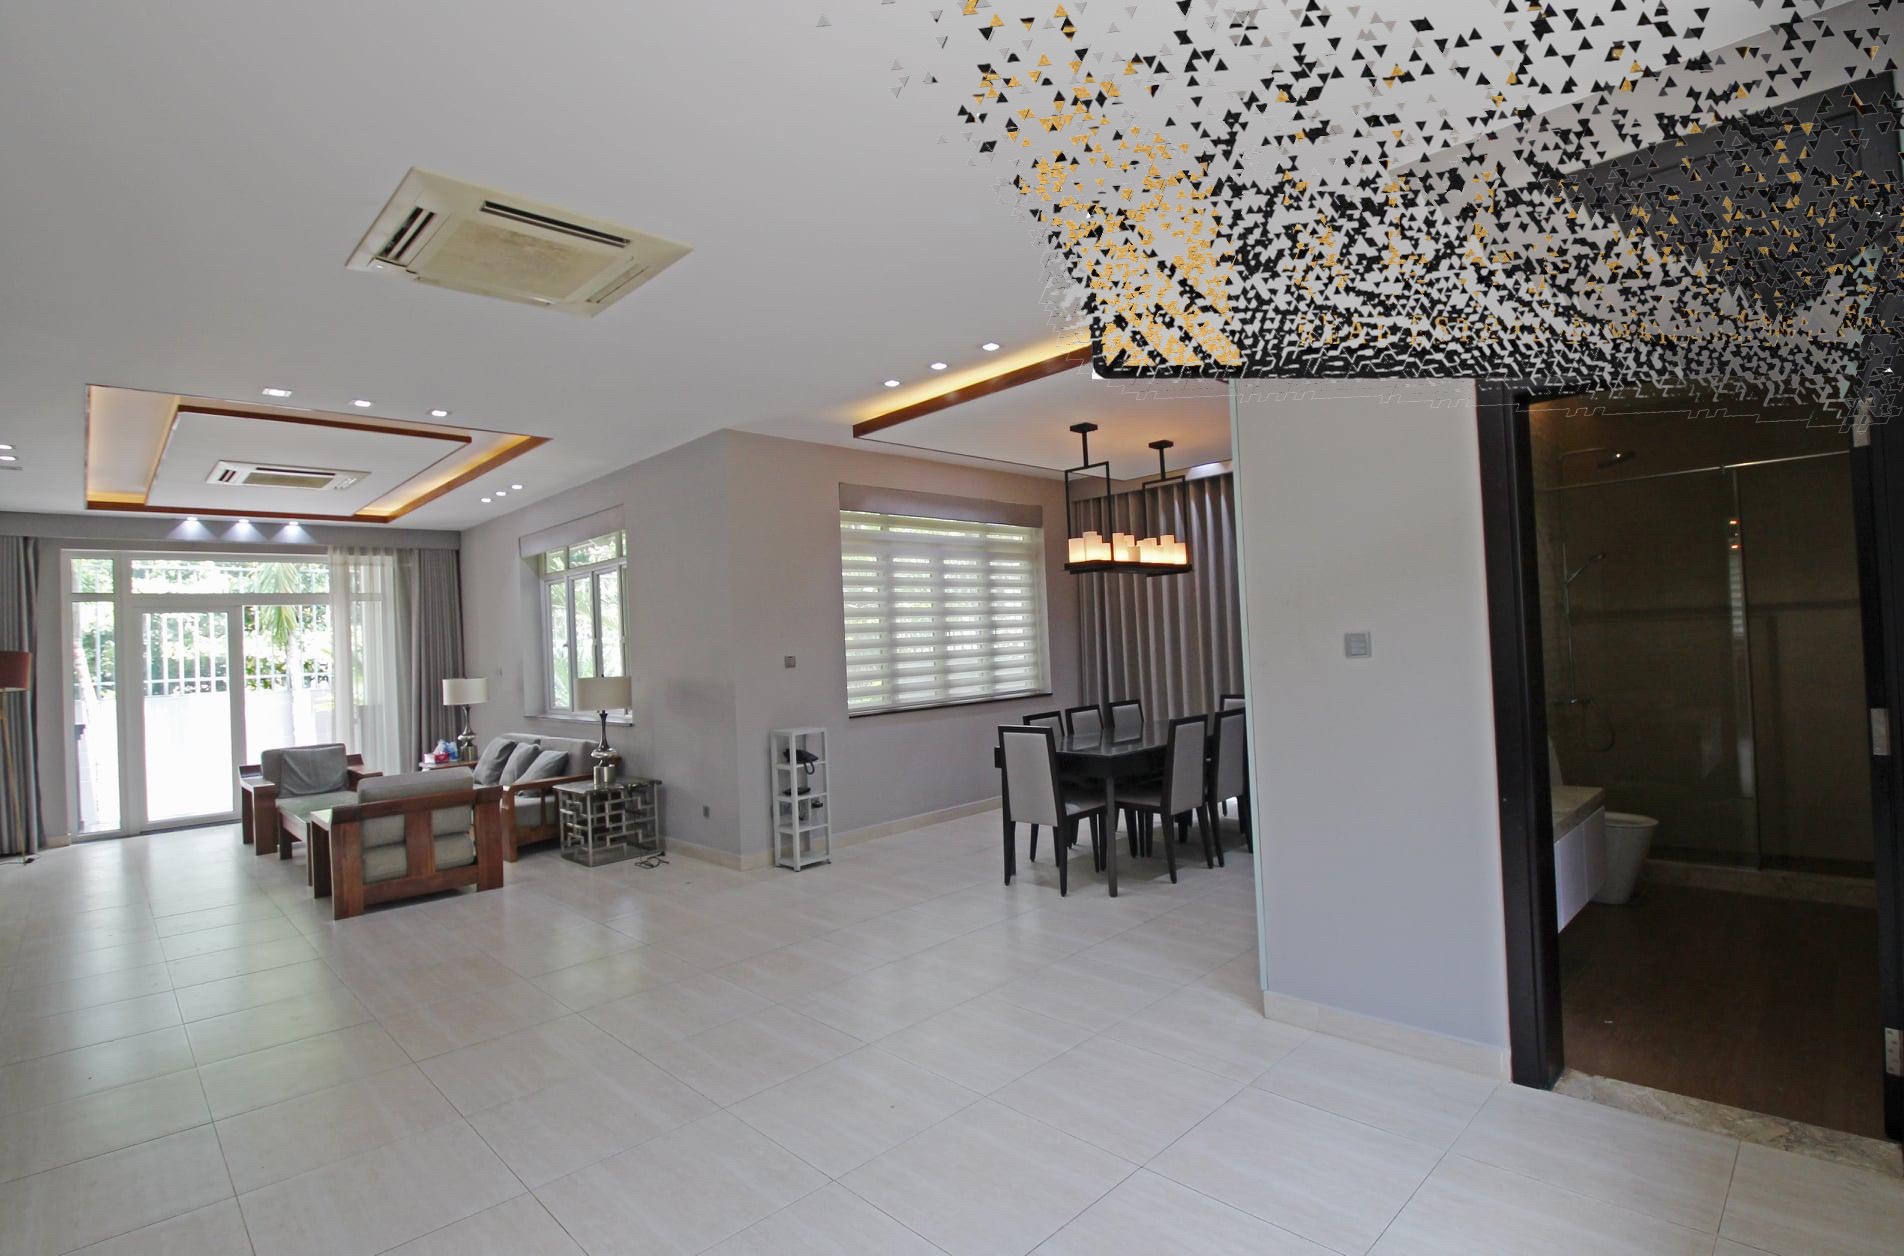 Modern villa in compound For Rent In Thao Dien ward, District 2 - 5 bedrooms